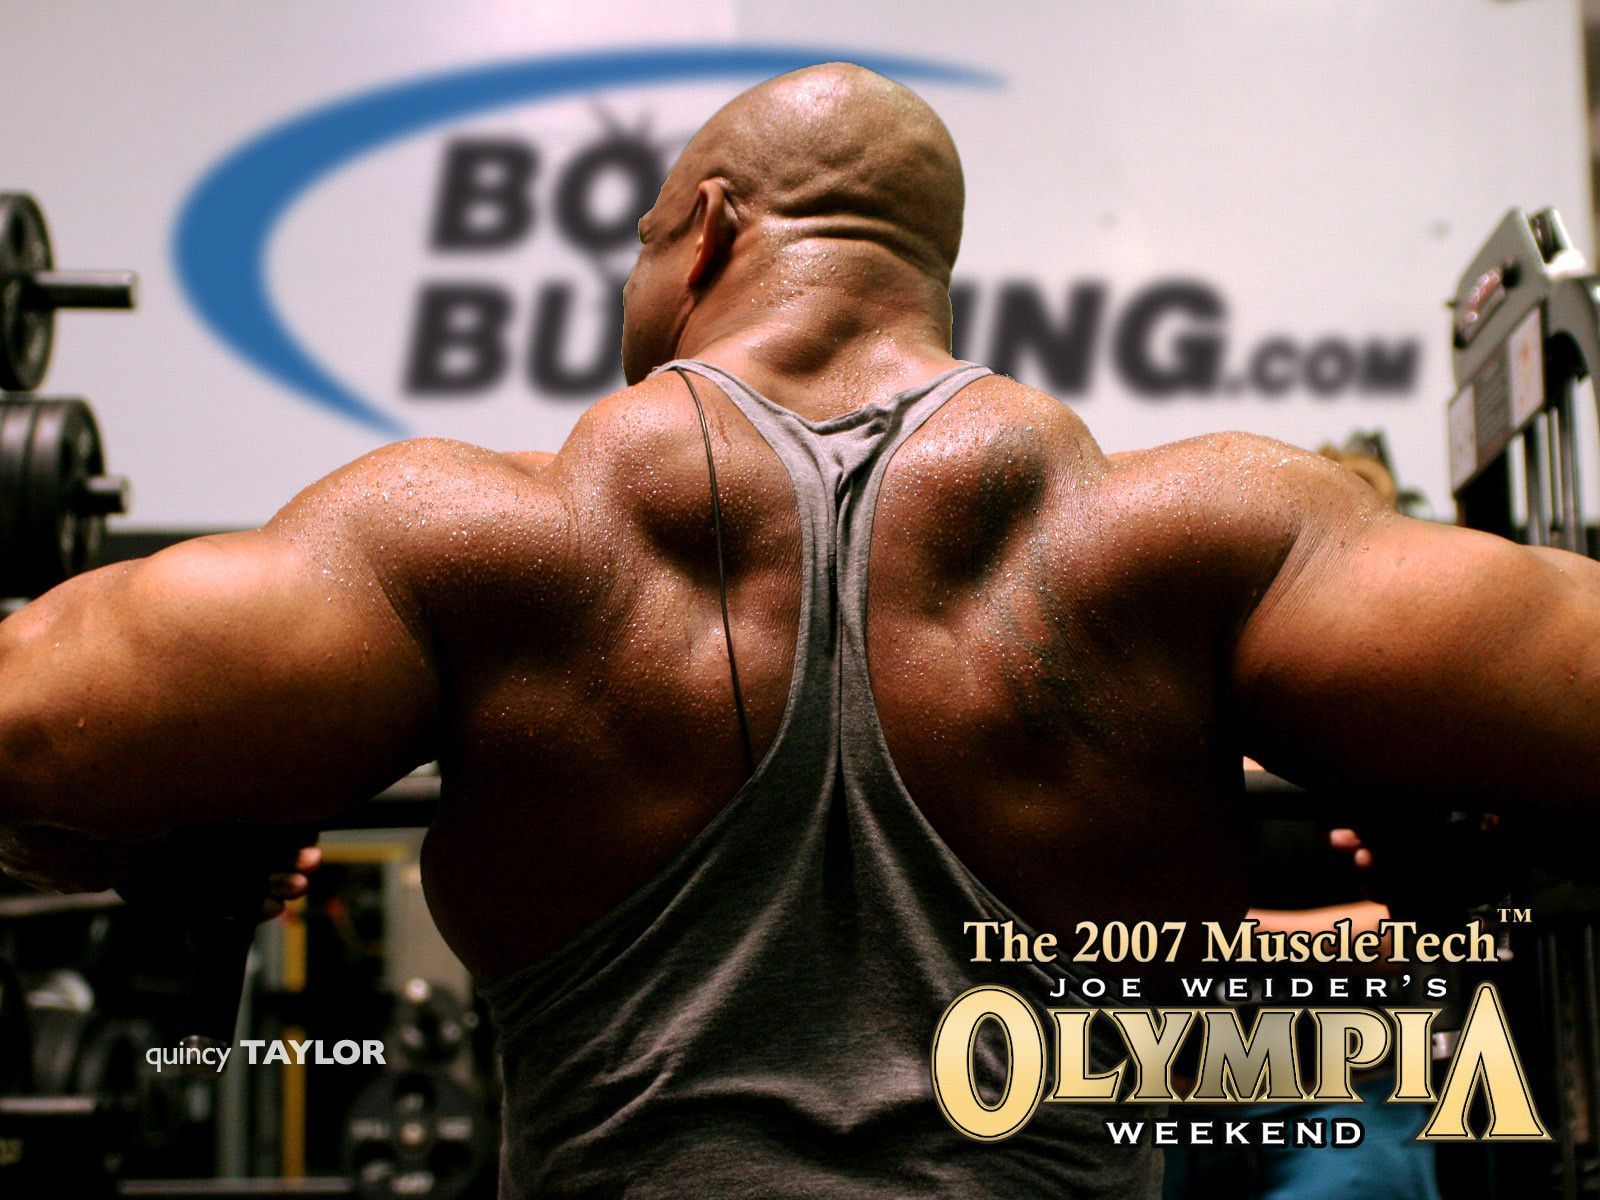 Wallpapers Mr Olympia - Wallpaper Cave